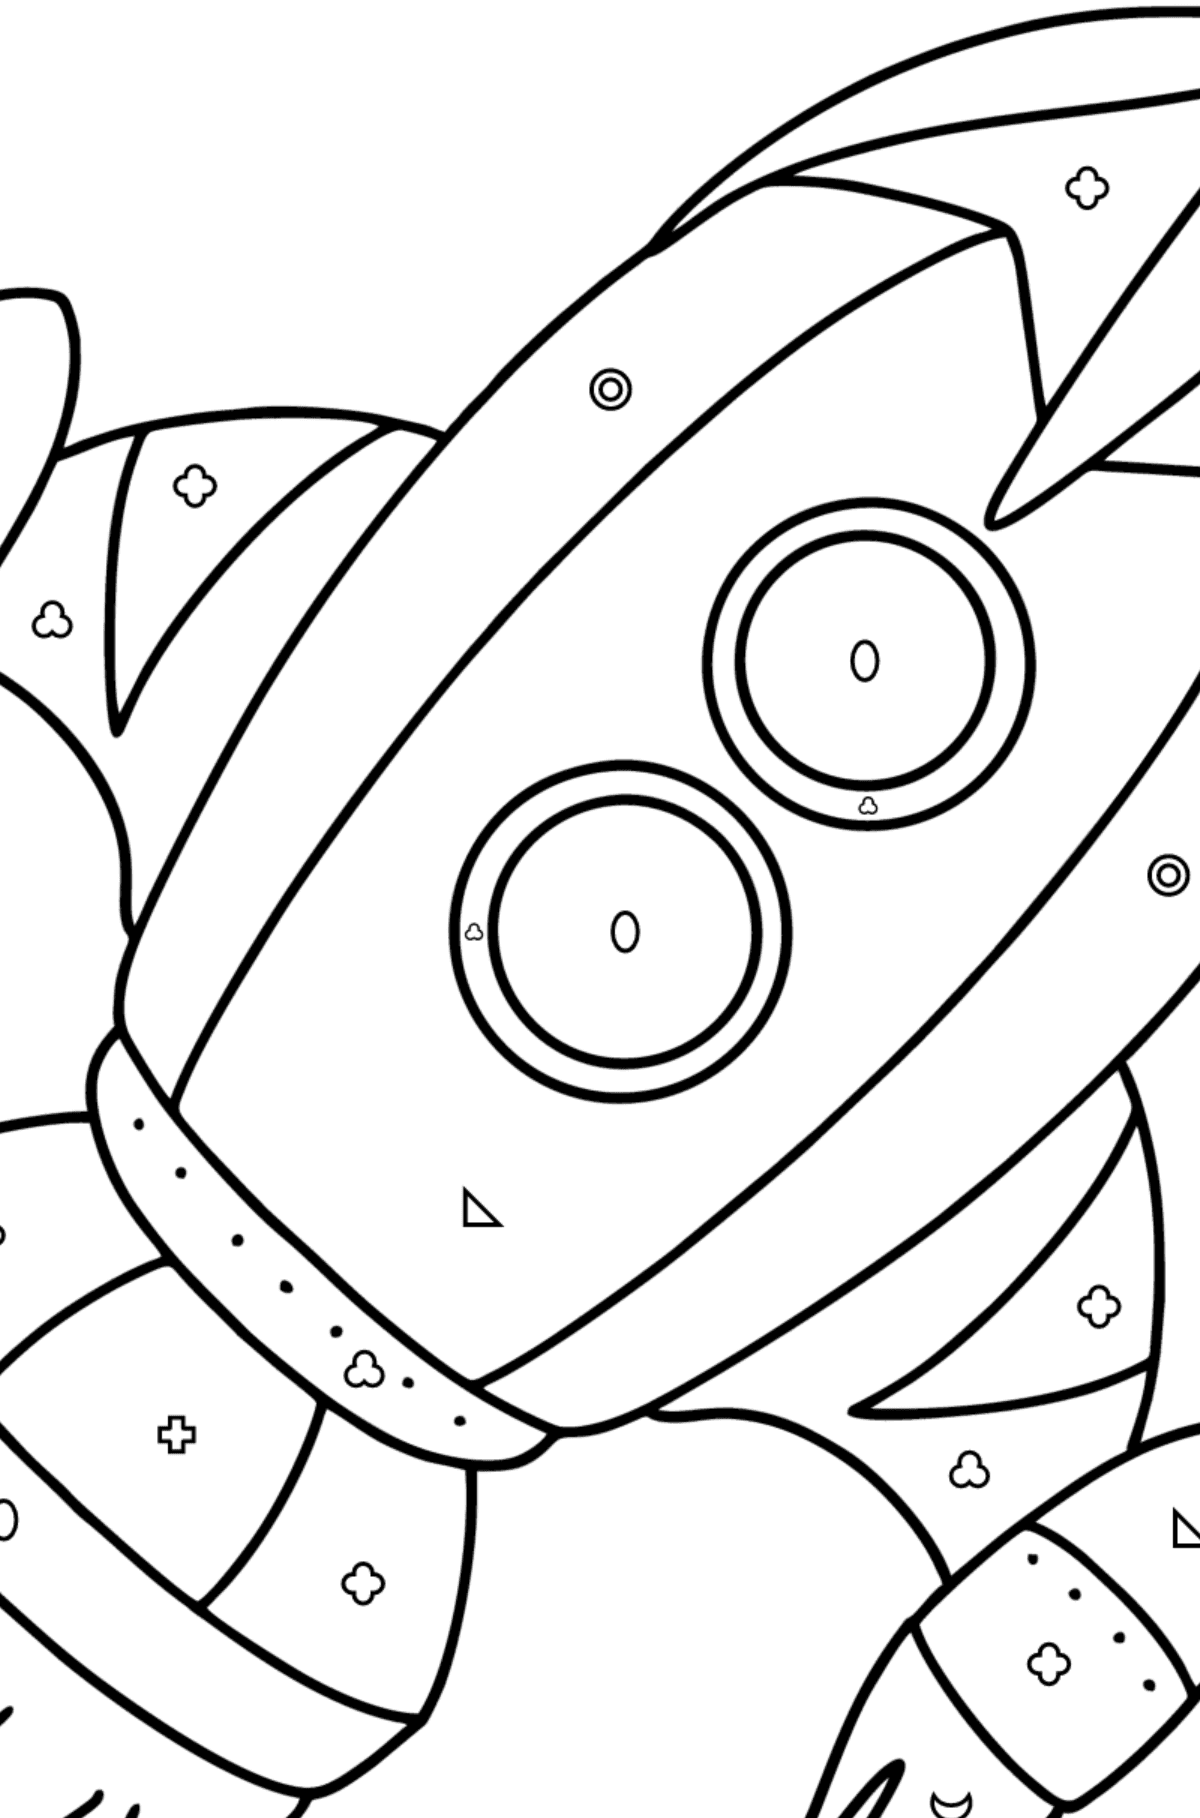 Cartoon rocket coloring page - Coloring by Geometric Shapes for Kids